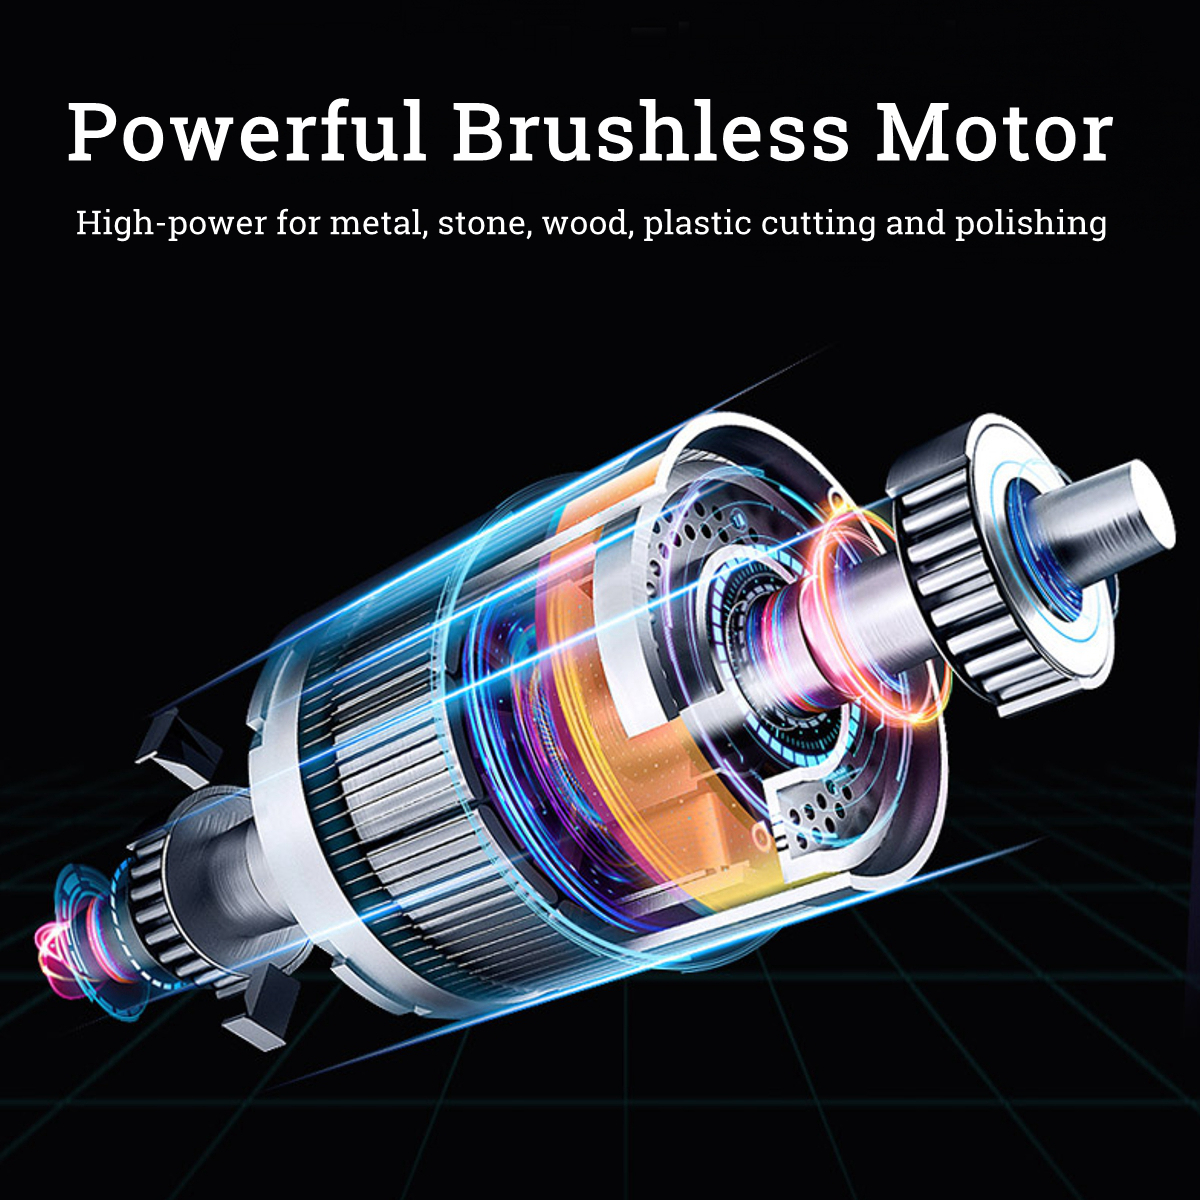 125mm-Brushless-Rechargable-Angle-Grinder-W-12-Battery-Metal-Stone-Wood-Plastic-Cutting-Polishing-To-1875442-6